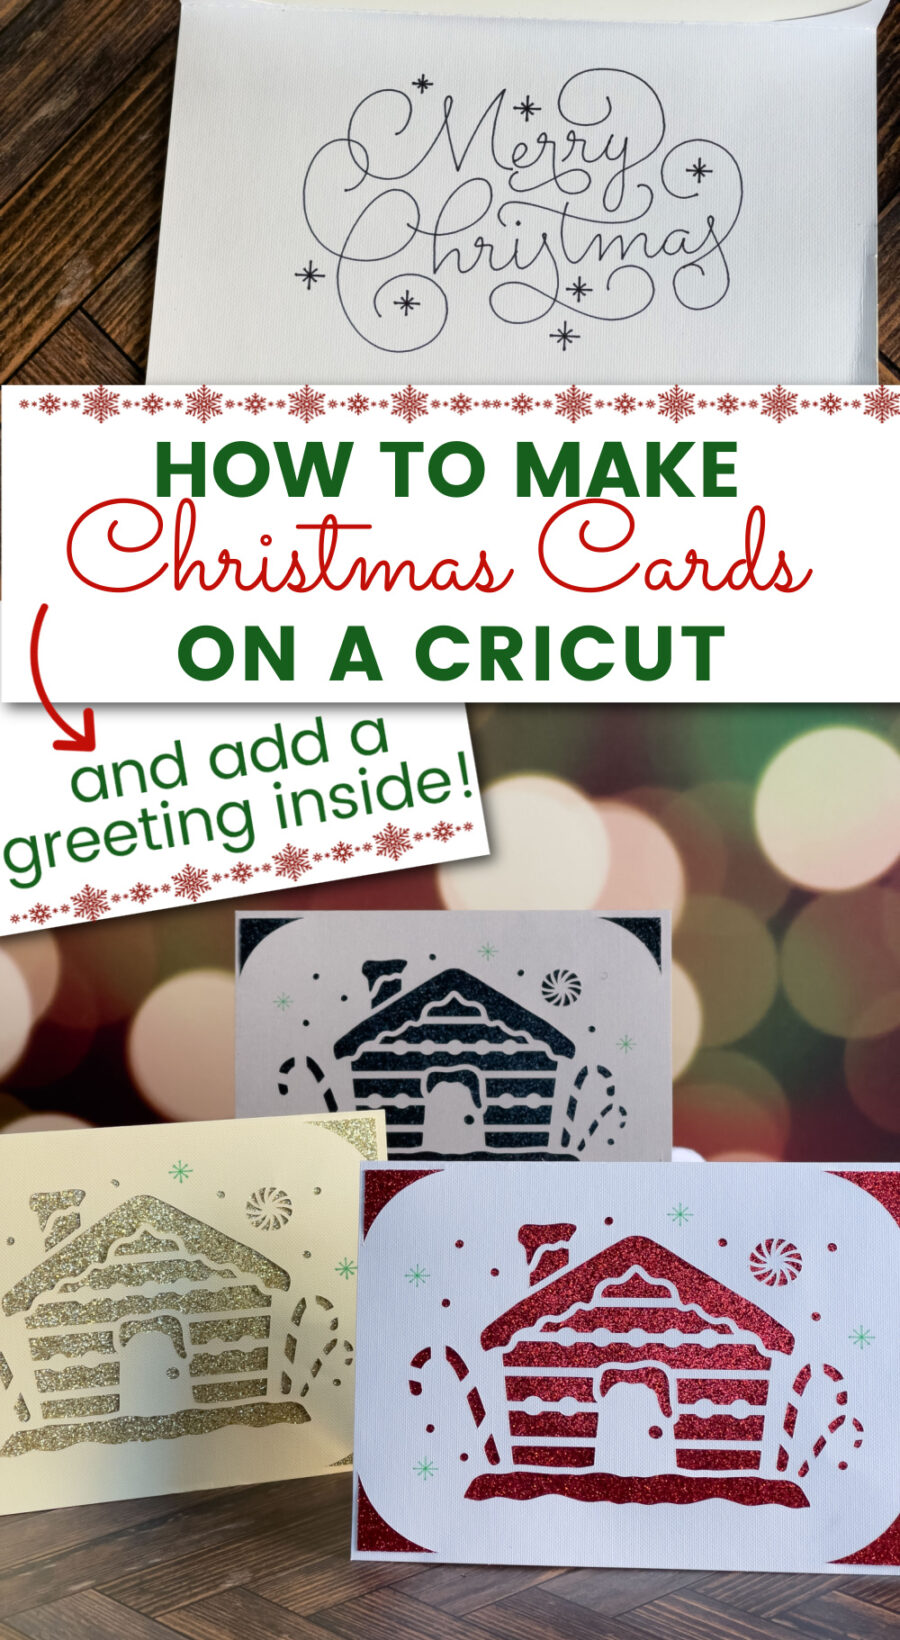 Cricut Christmas Cards with inside greeting